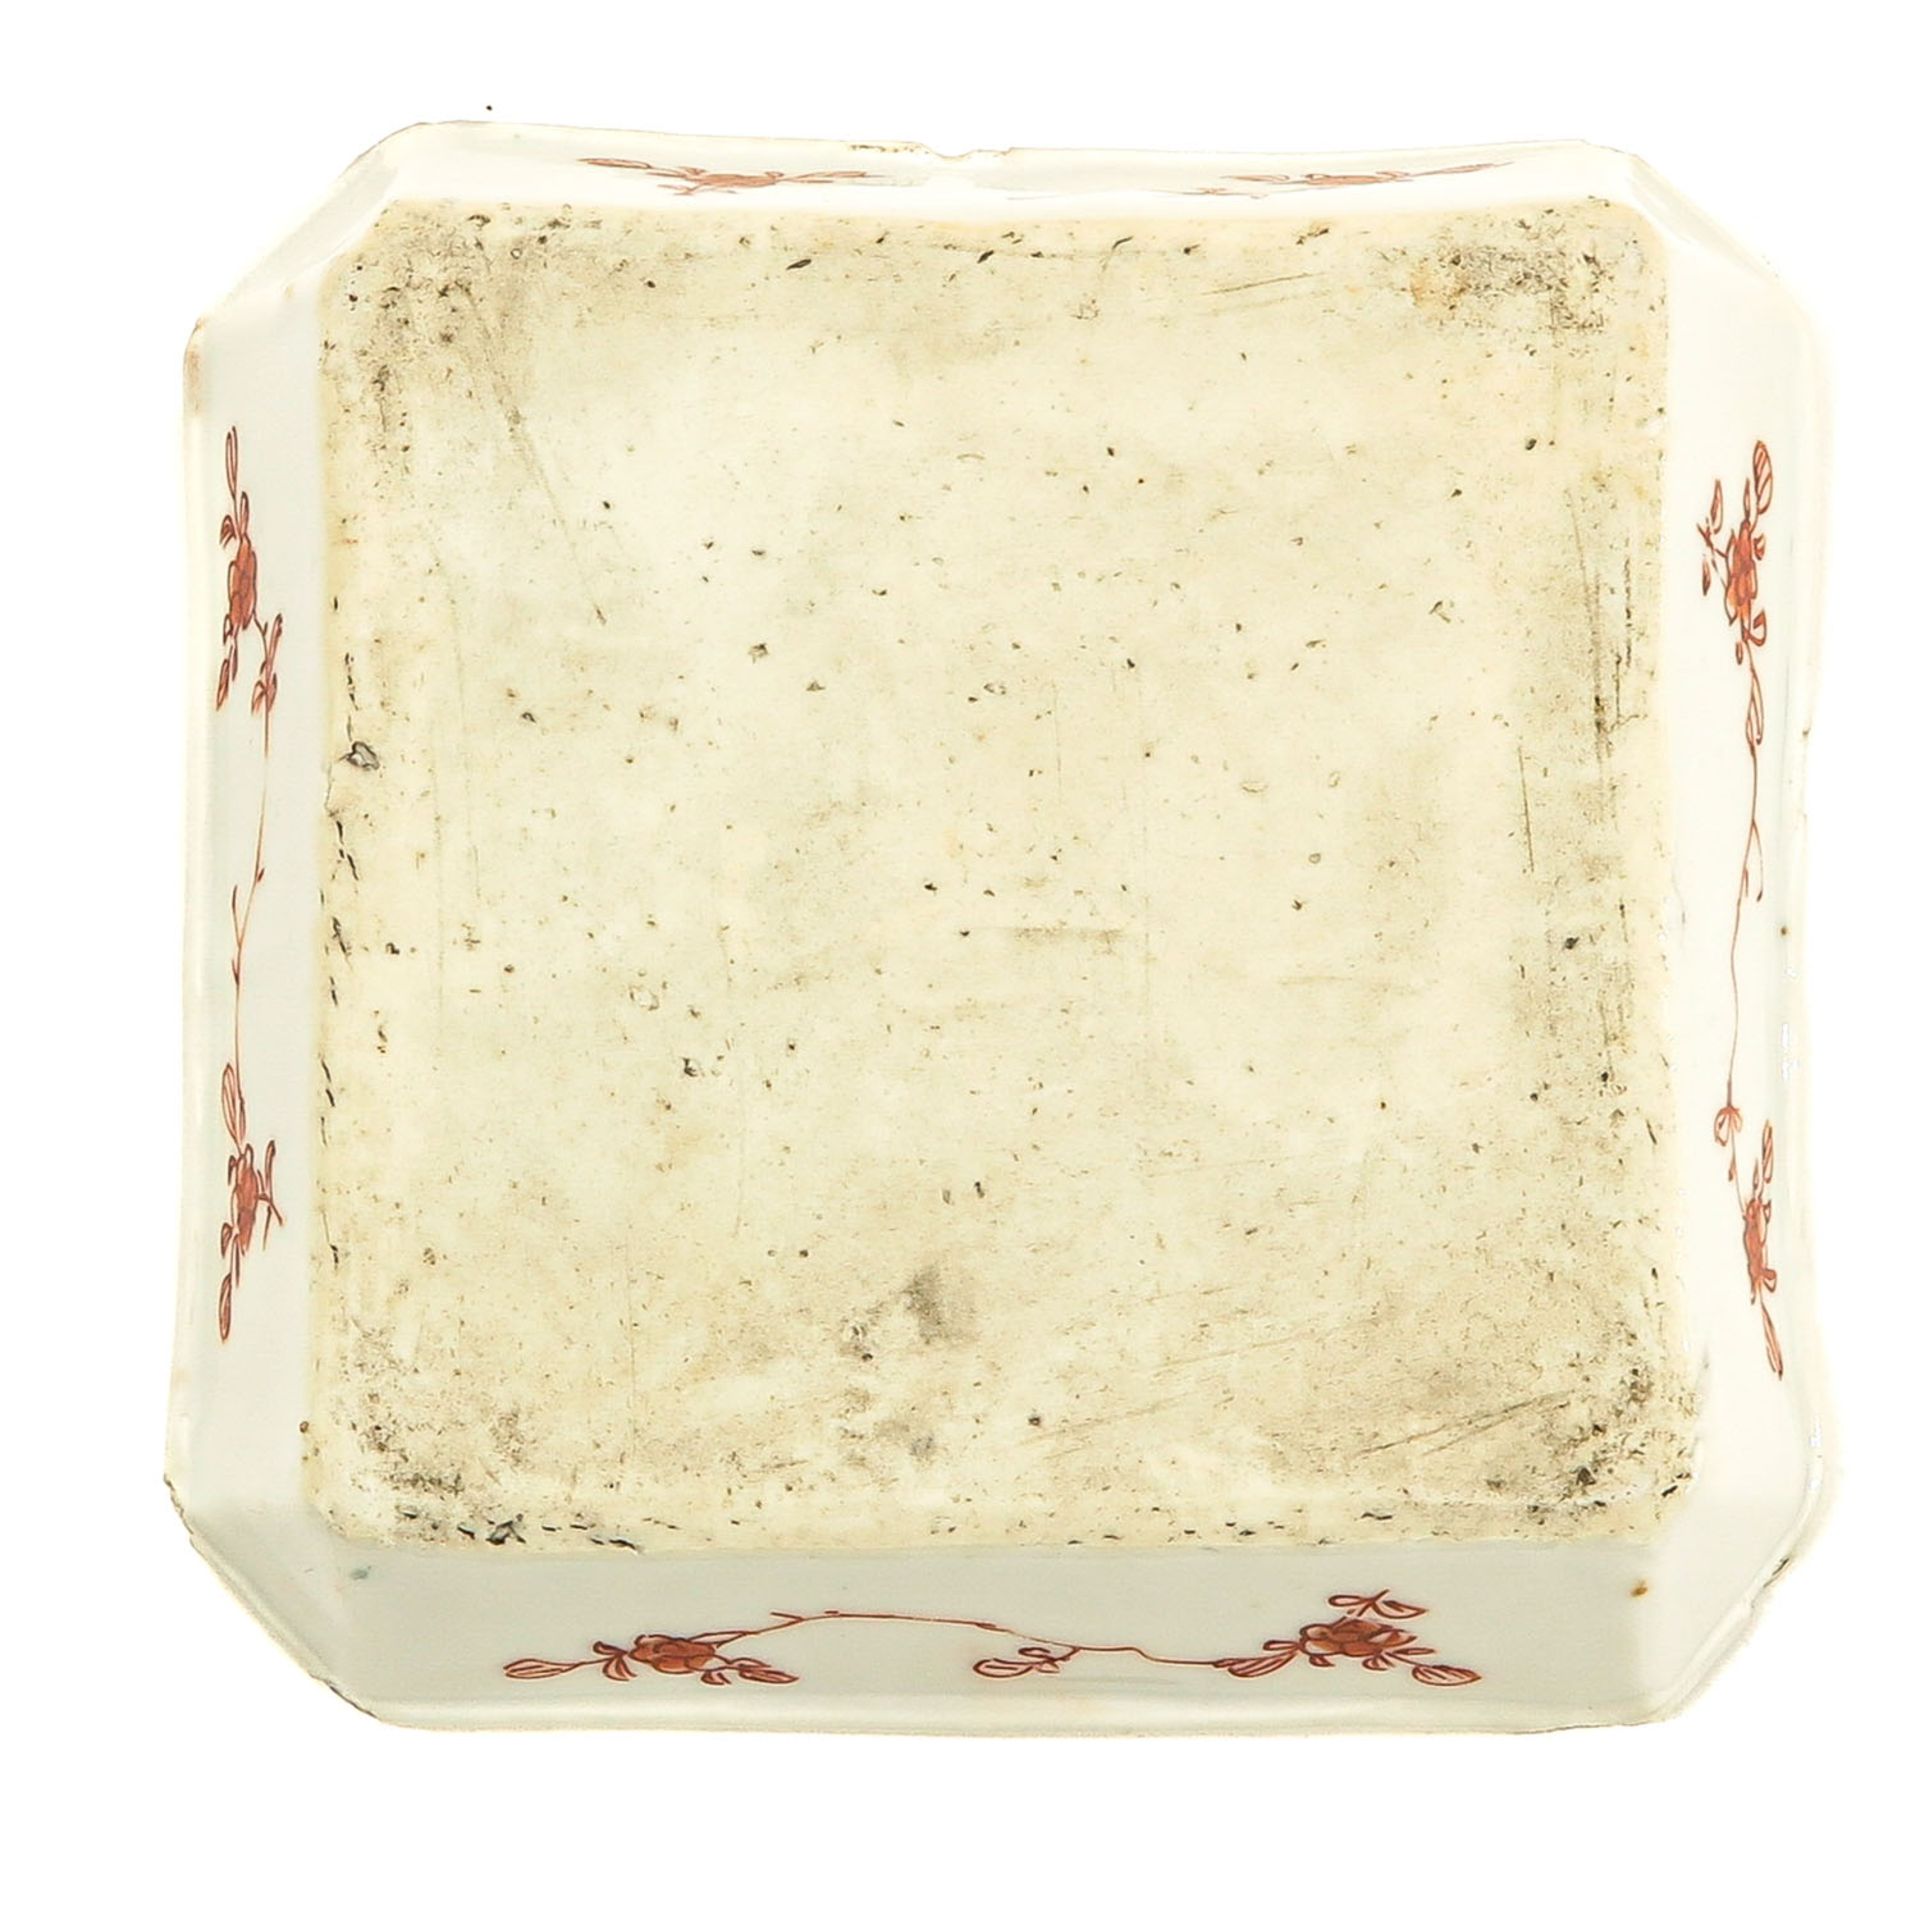 A Small Milk and Blood Tray - Image 2 of 5